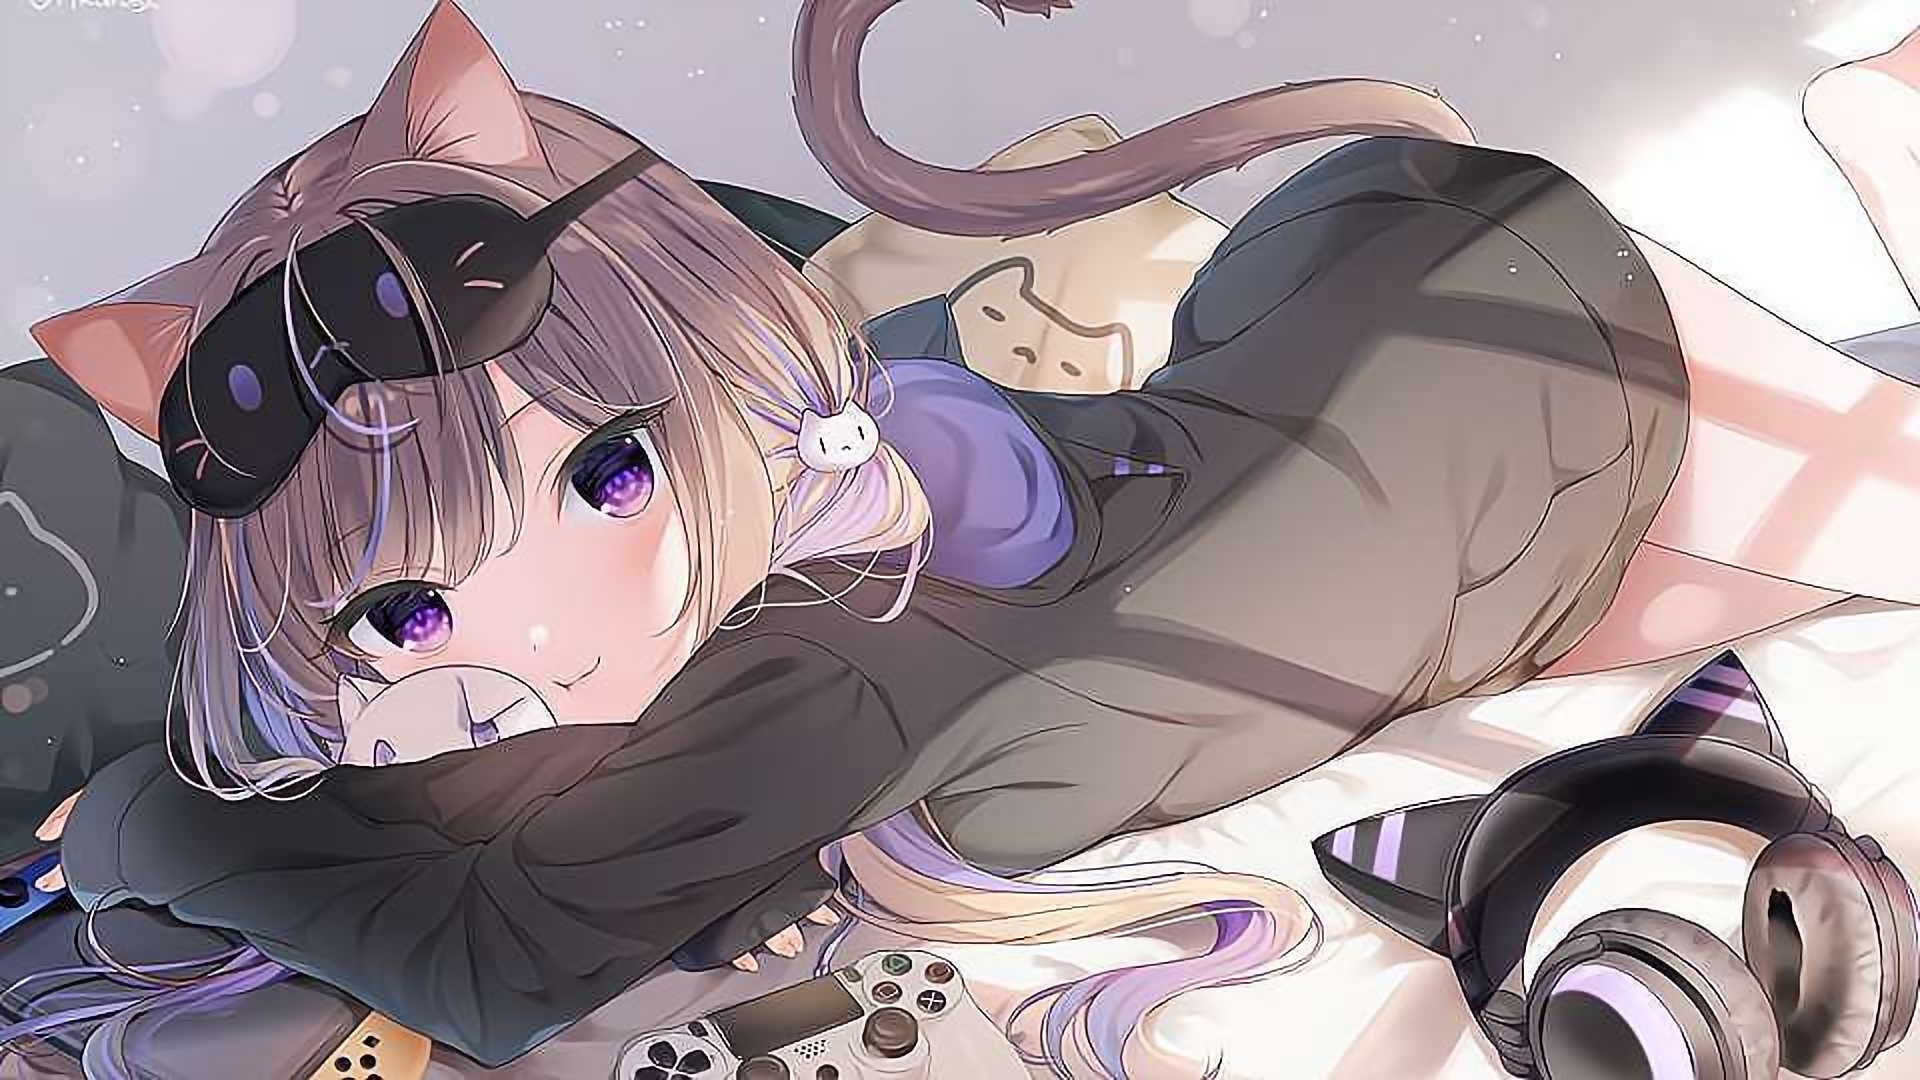 Anime 1920x1080 fantasy art cityscape anime girls cat girl cat ears cat tail controllers headphones purple eyes Nintendo Switch PlayStation 4